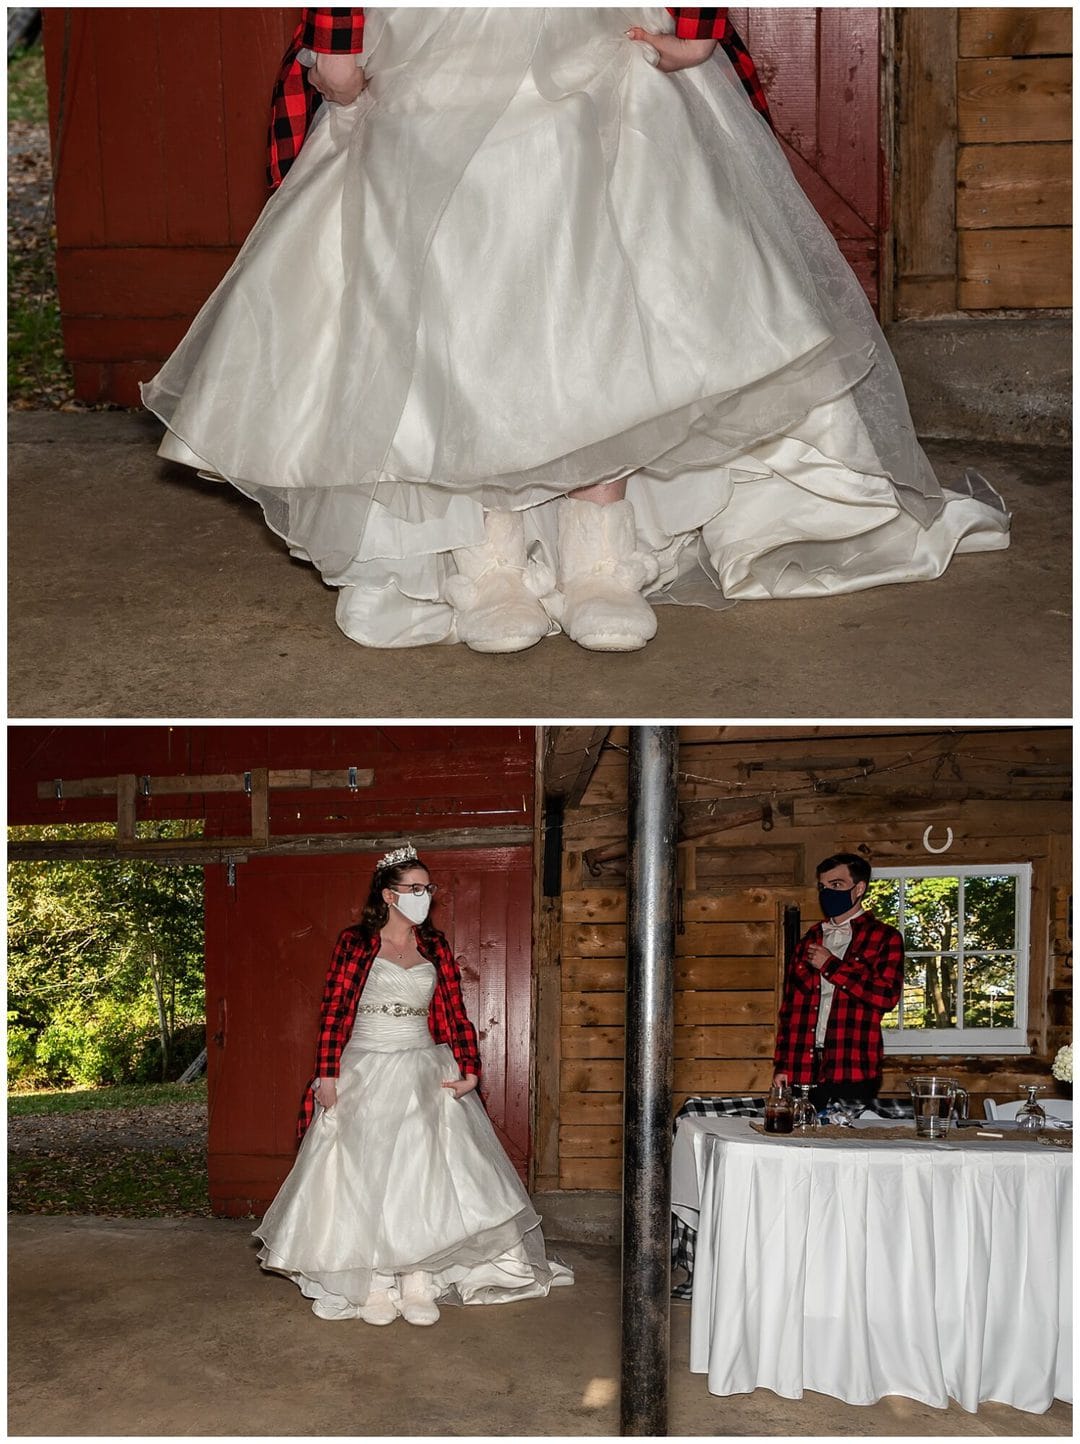 The bride changes into her comfy slippers for her wedding reception with the help of the groom at the Kinley Farm in Lunenburg, NS.